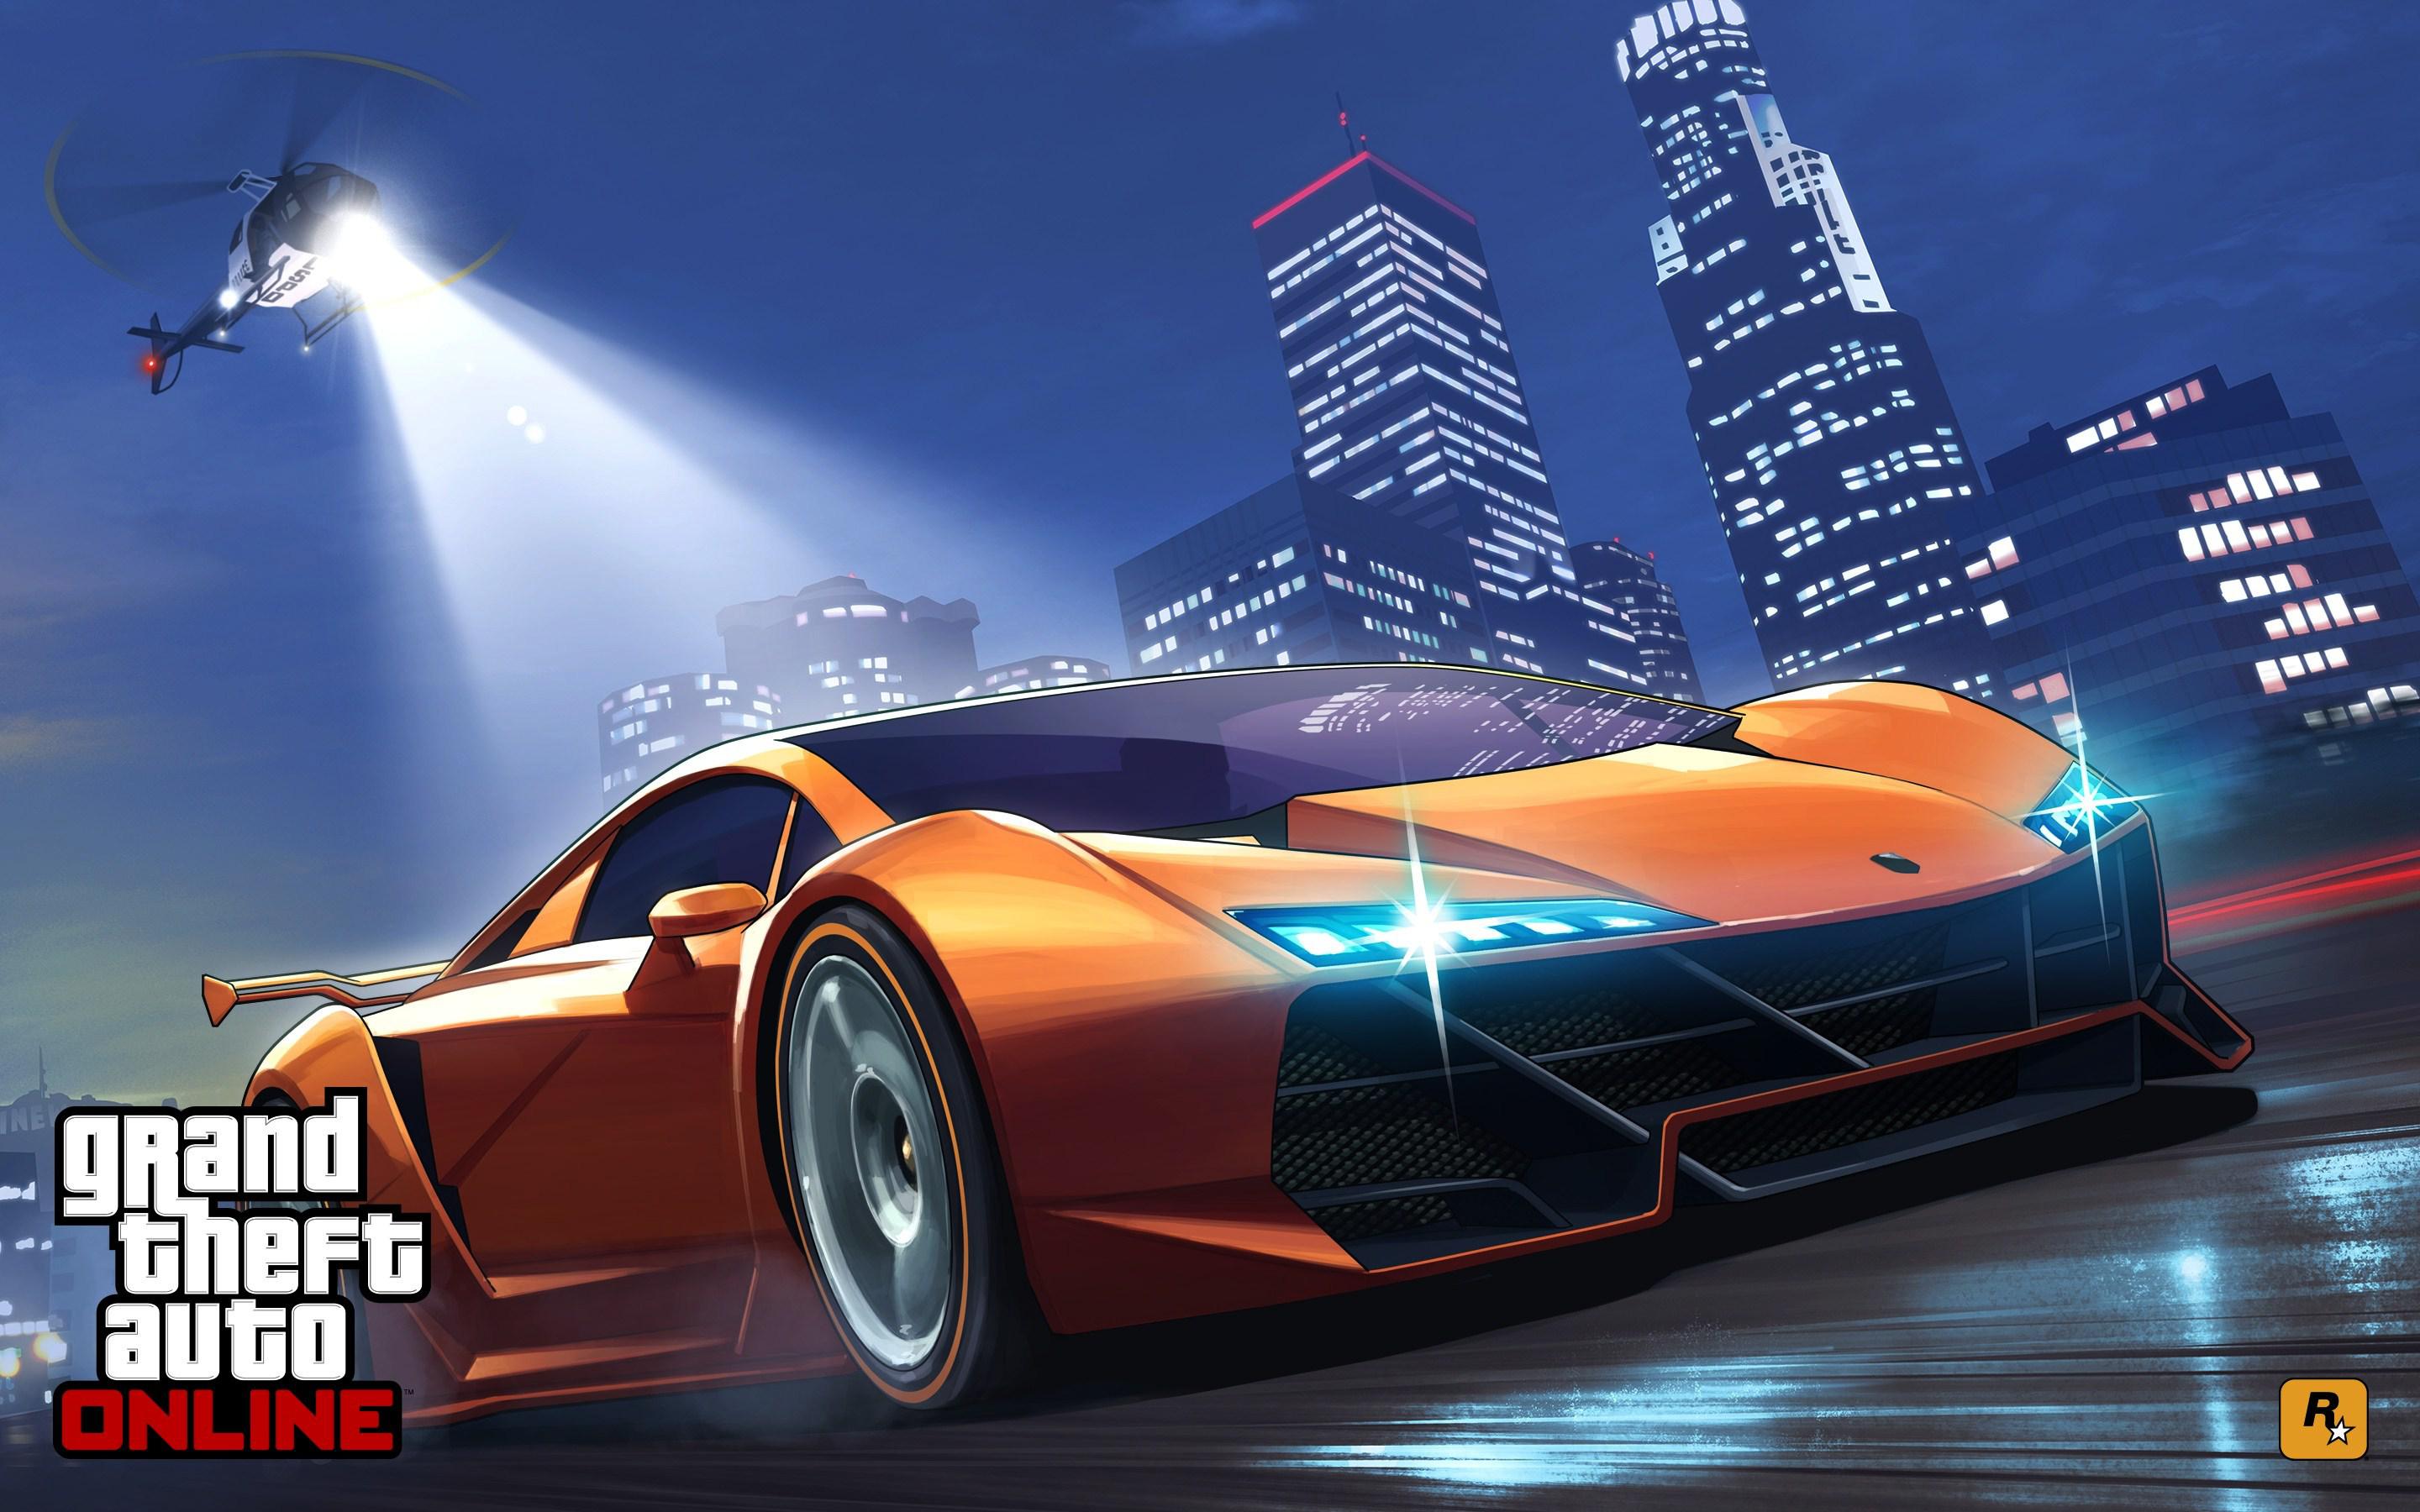 HD Grand Theft Auto Online Game Wallpaper